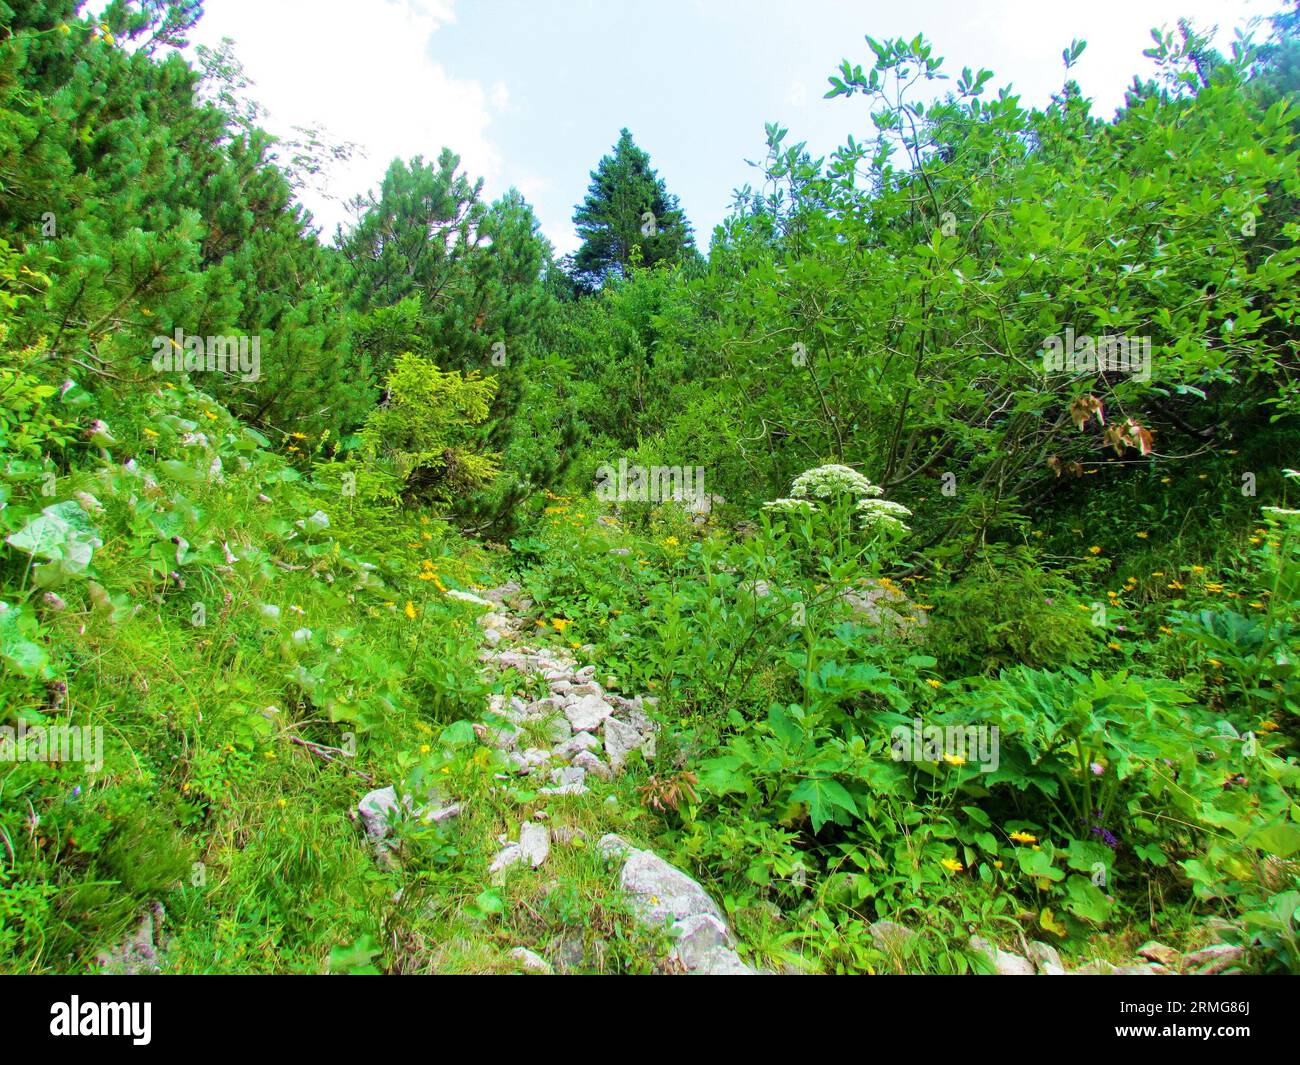 Small clearing with yellow blooming hawkbit (Leontodon pyrenaicus) and white flowering alpine hogweed plant in Slovenia Stock Photo